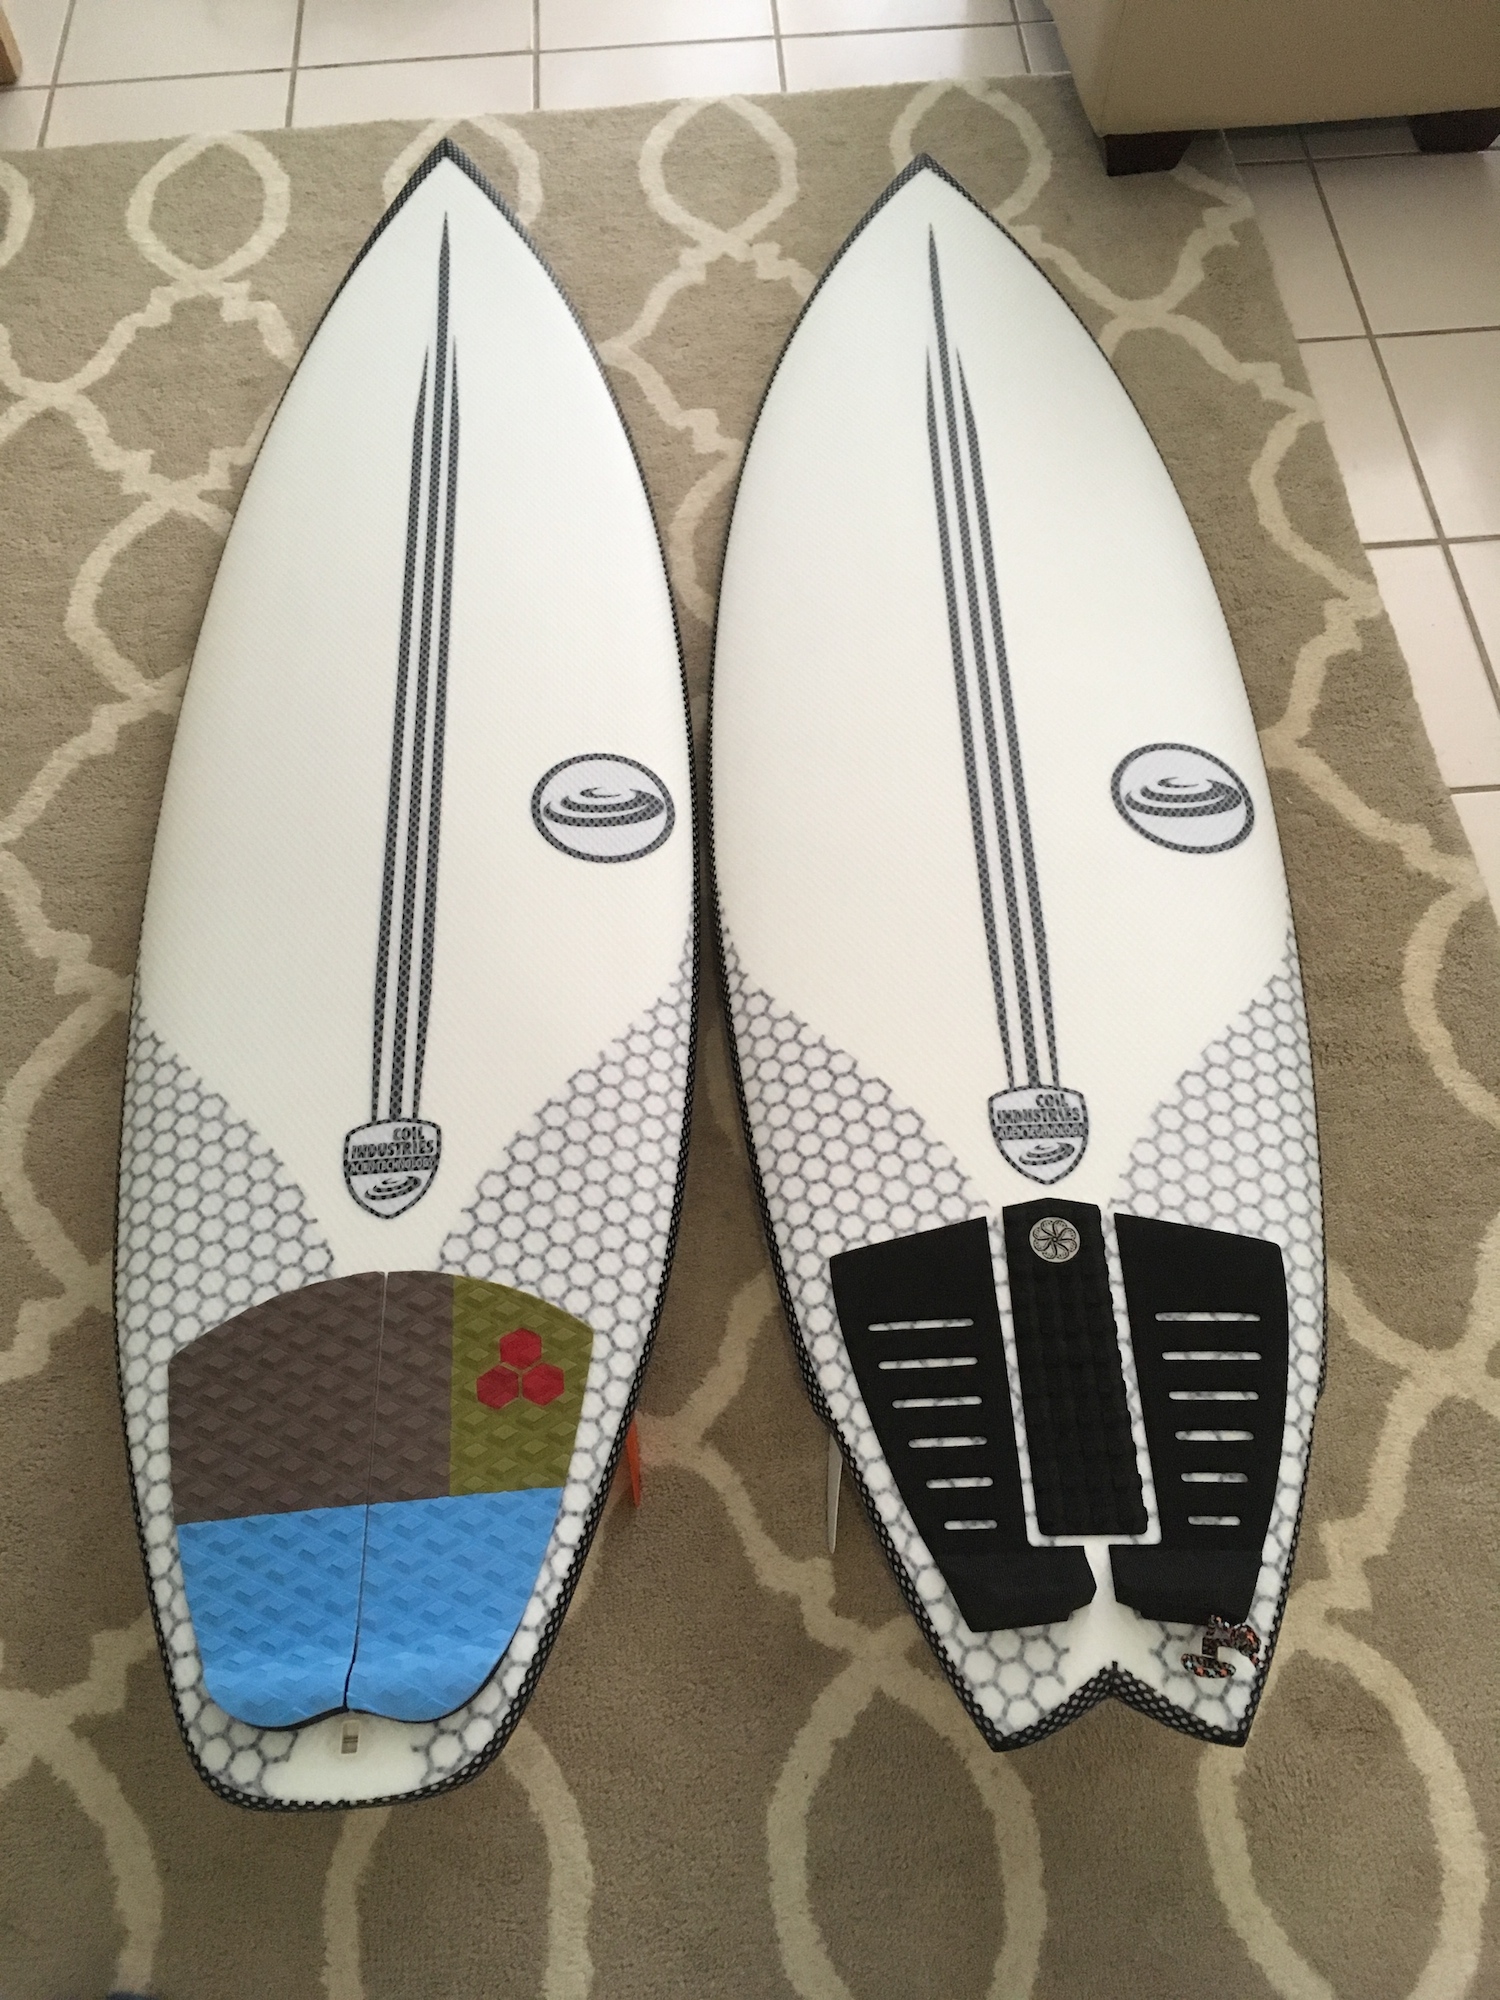 Coil Surfboards